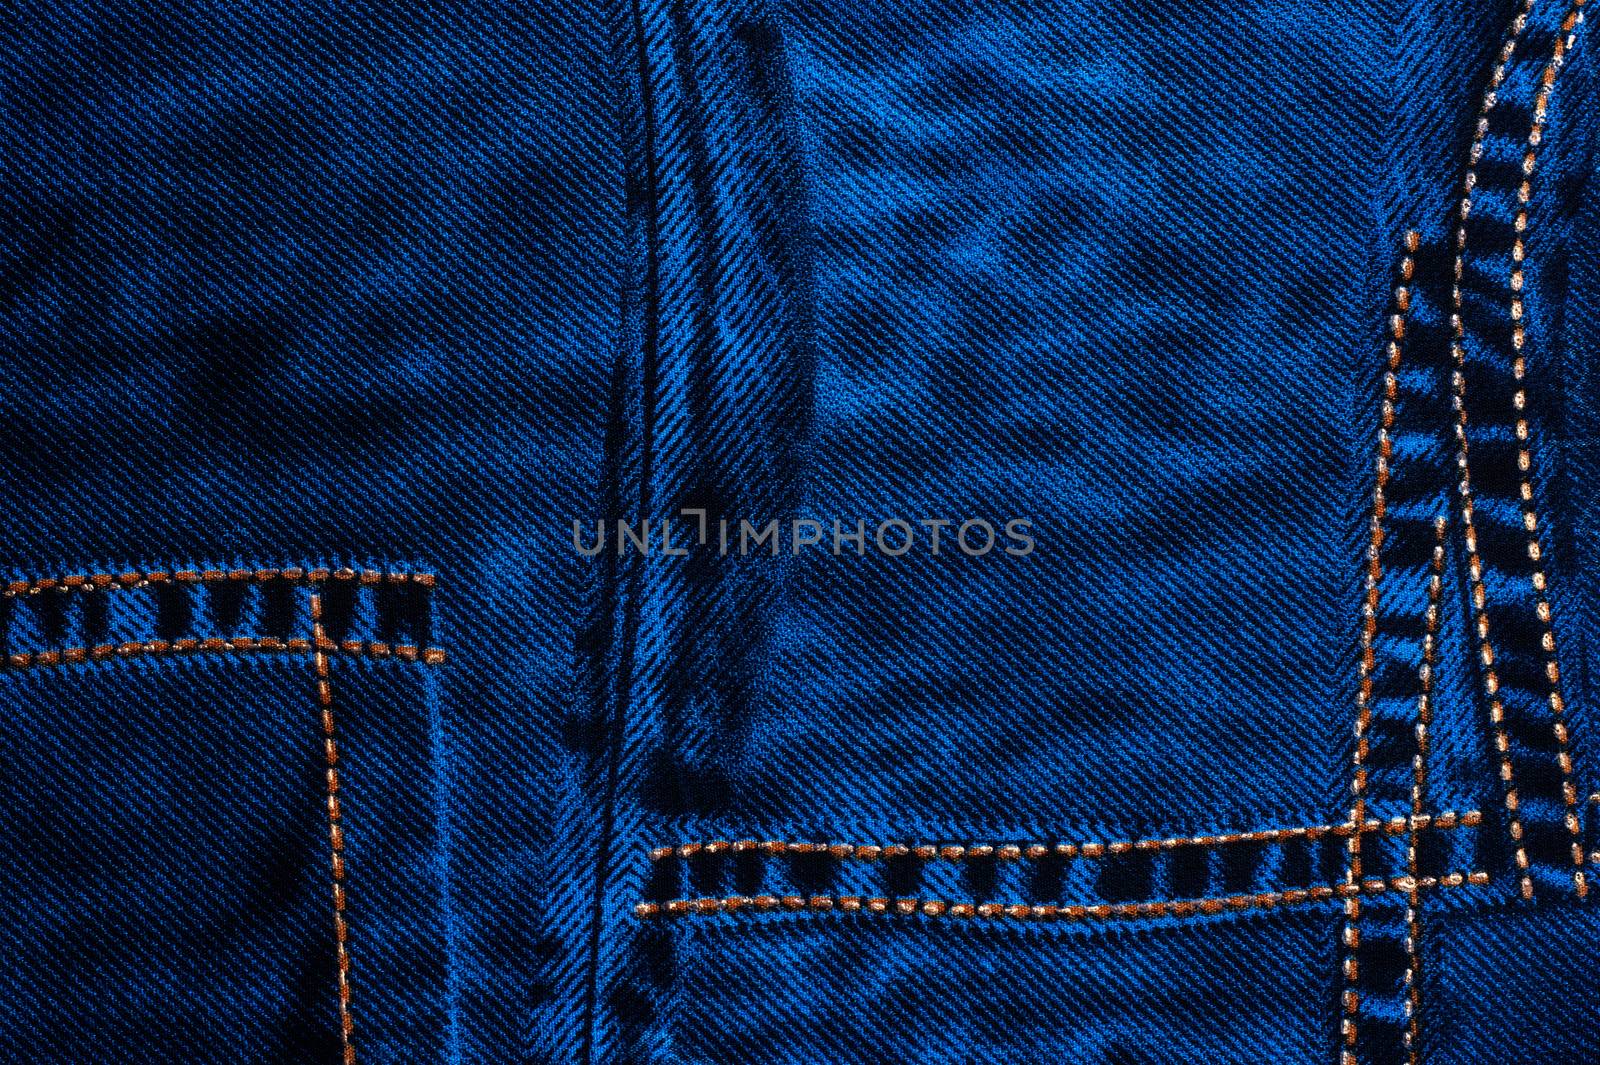 texture background with blue denim fabric with stitches of thread